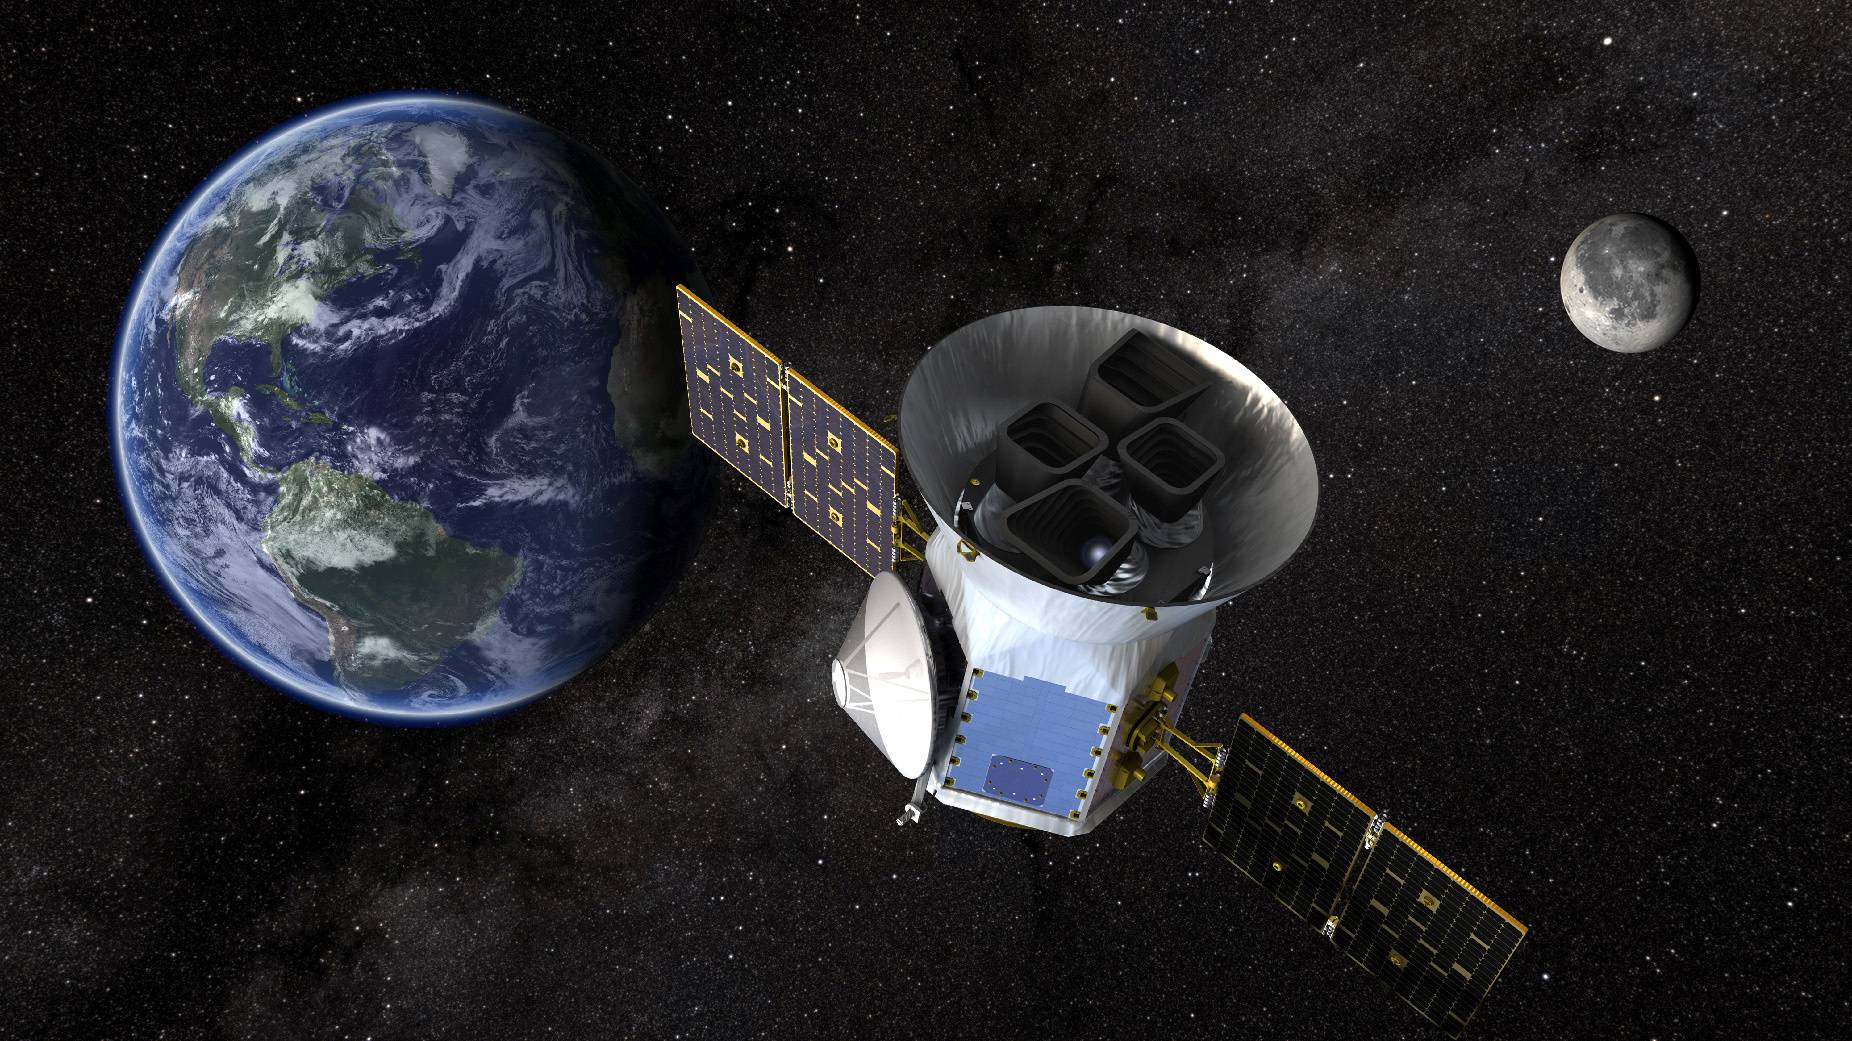 This illustration of NASA's TESS, the Transiting Exoplanet Survey Satellite, shows an artist's rendition of the space telescope was launched in April 2018 aboard a SpaceX rocket. | NASA / VIA REUTERS 